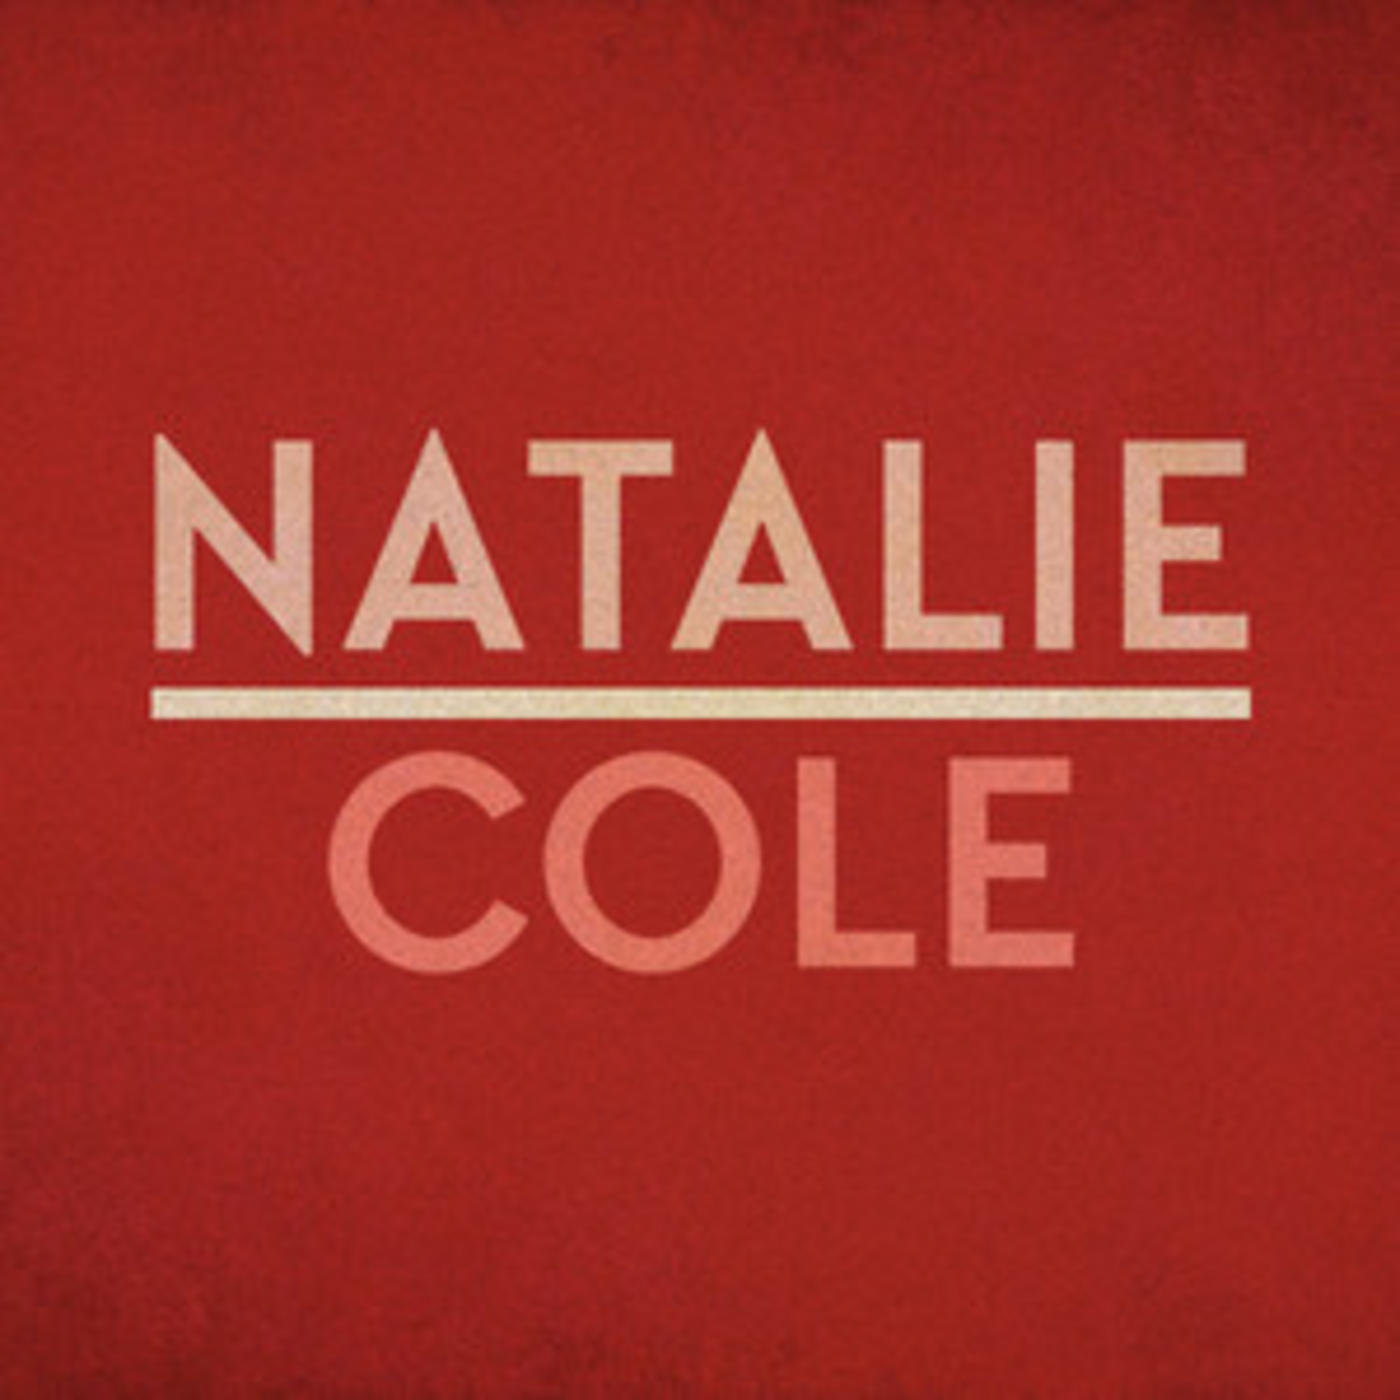 Natalie Cole - Official Playlist - This Will Be (An Everlasting Love), Our Love Is Here To Stay